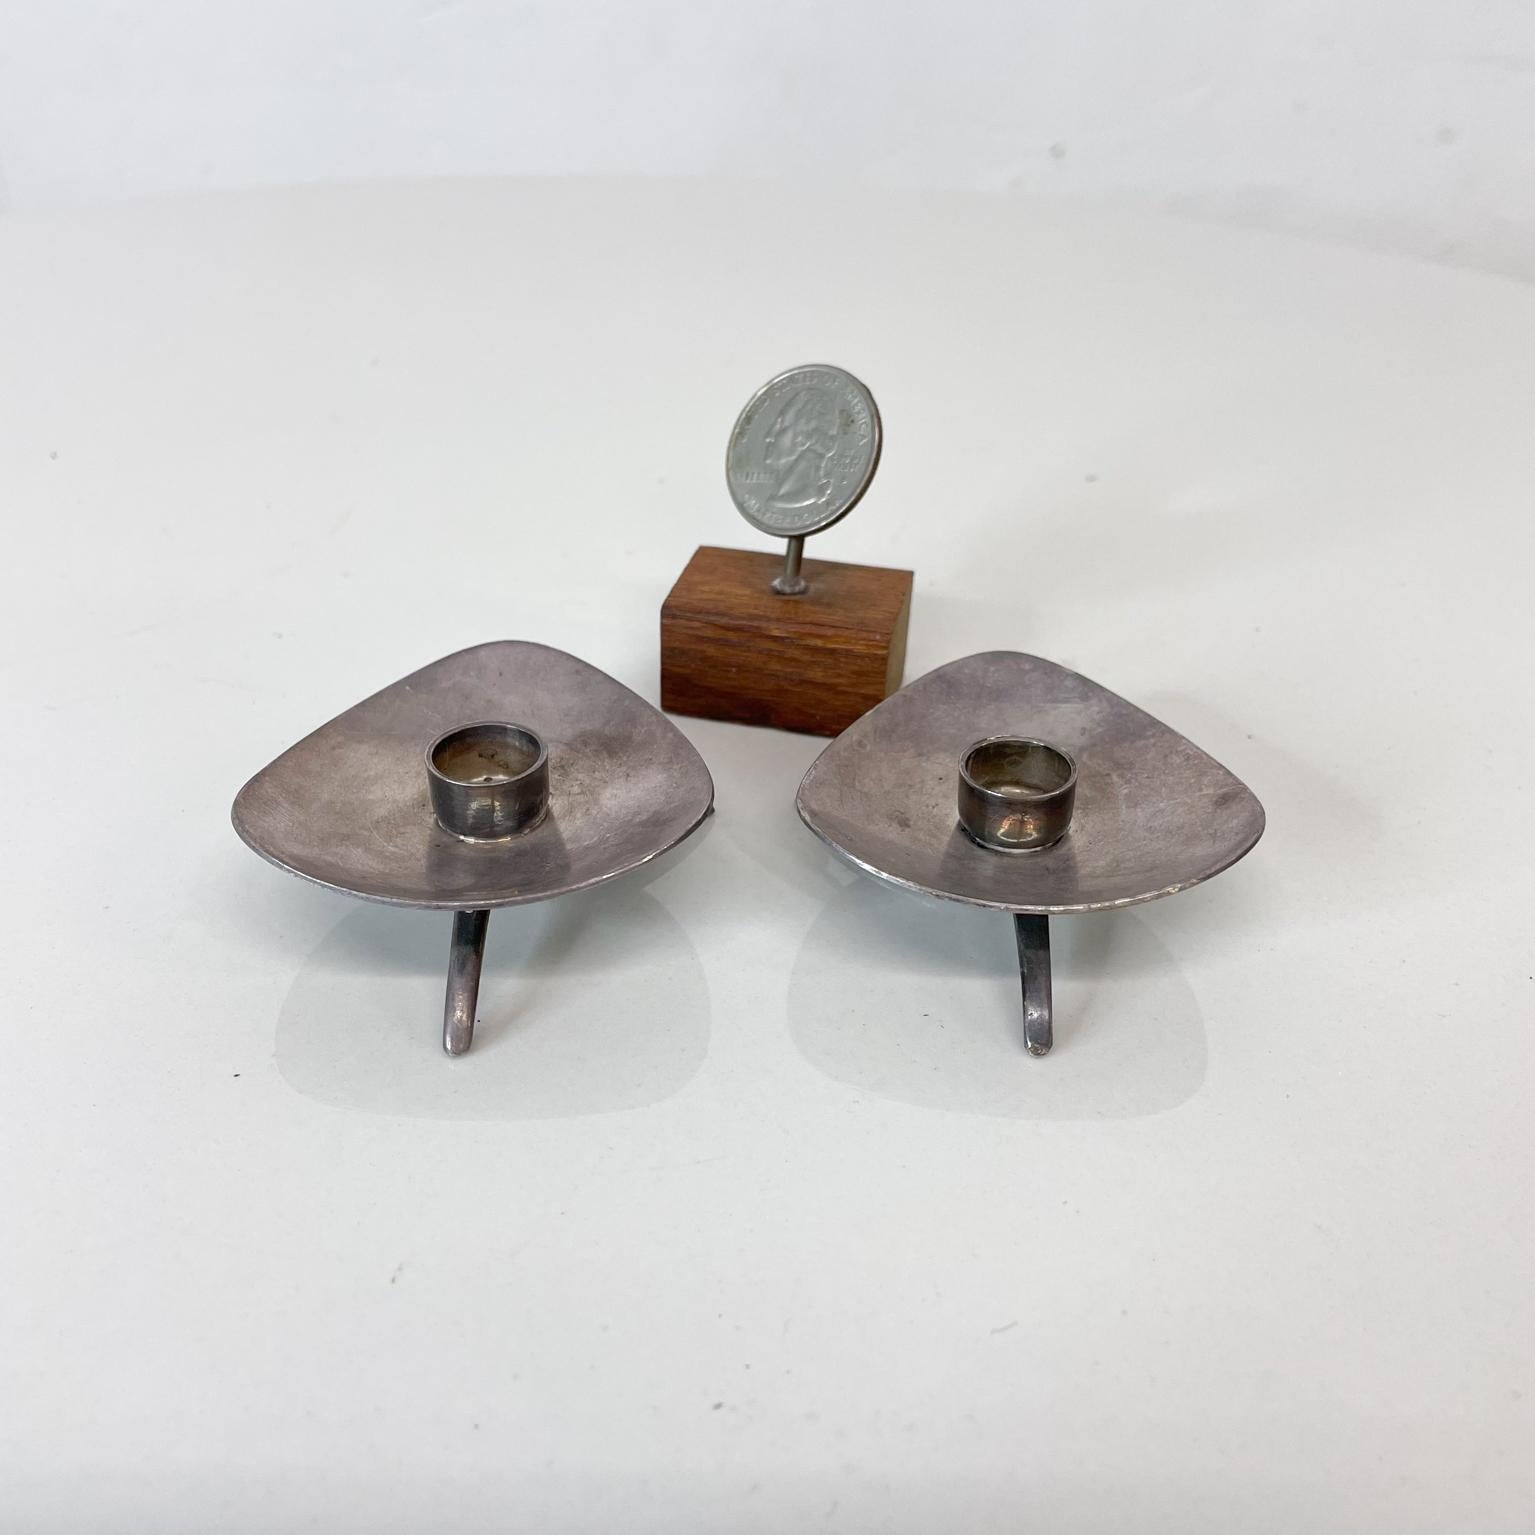 Pair of danish modern silver plated candle holders by COHR ATLA Denmark. 
Characterized by modernist form tripod base with lovely sculptural shape. 
Maker stamped. Candle holders by Atla designed by Carl M. Cohr Denmark 1960s.
Measures: .63 H x 2.13